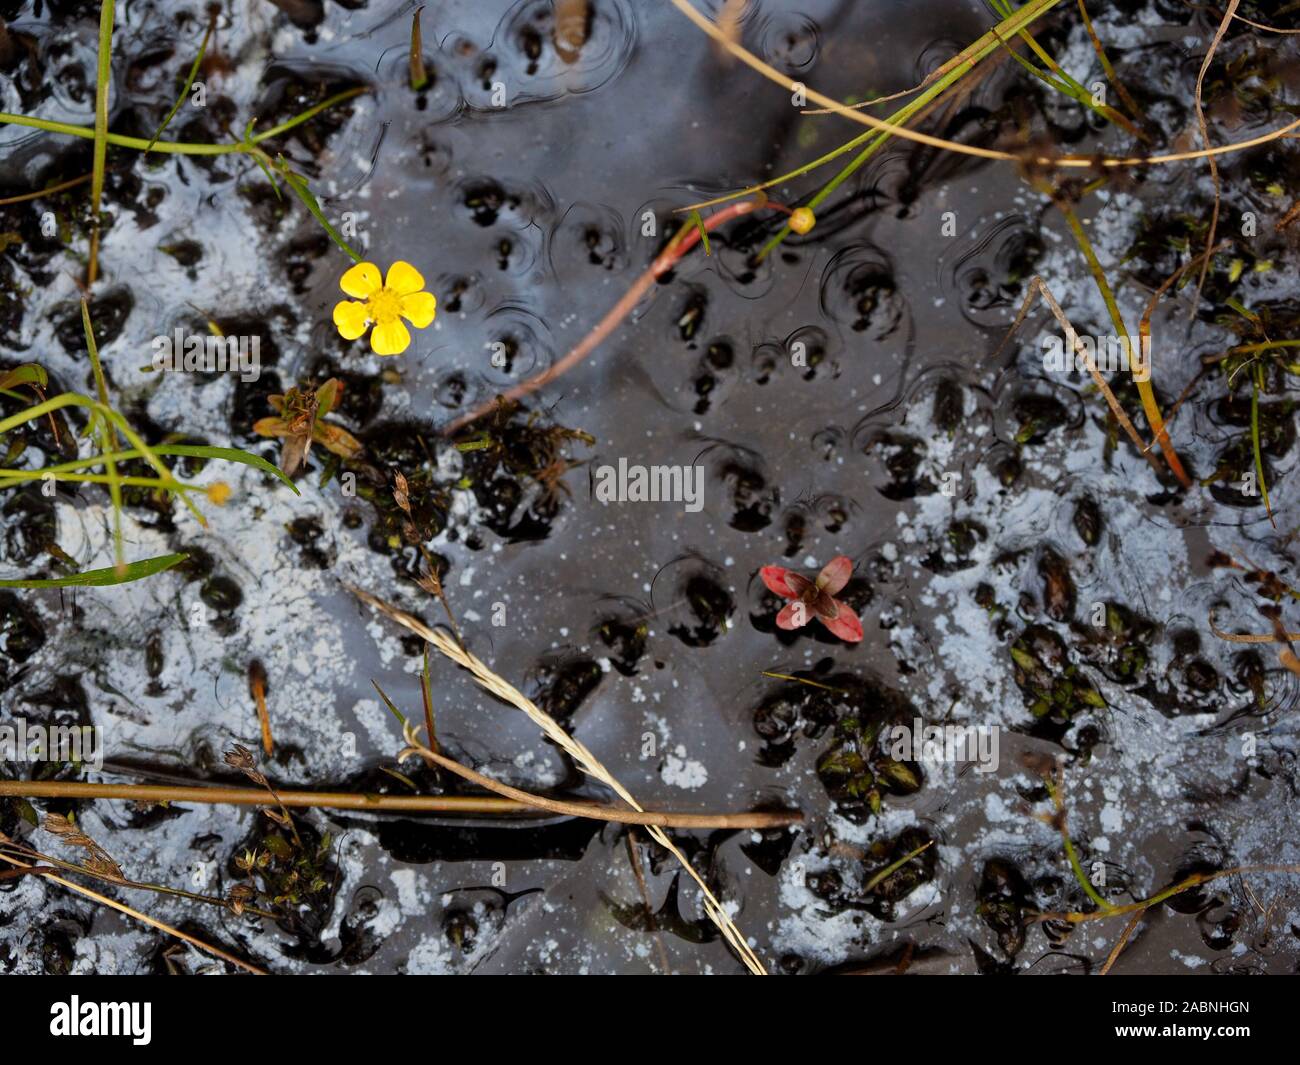 Natural bacterial film on water with yellow flower of lesser spearwort(Ranunculus flammula) & red leaves in a puddle in Swindale, Cumbria, England, UK Stock Photo